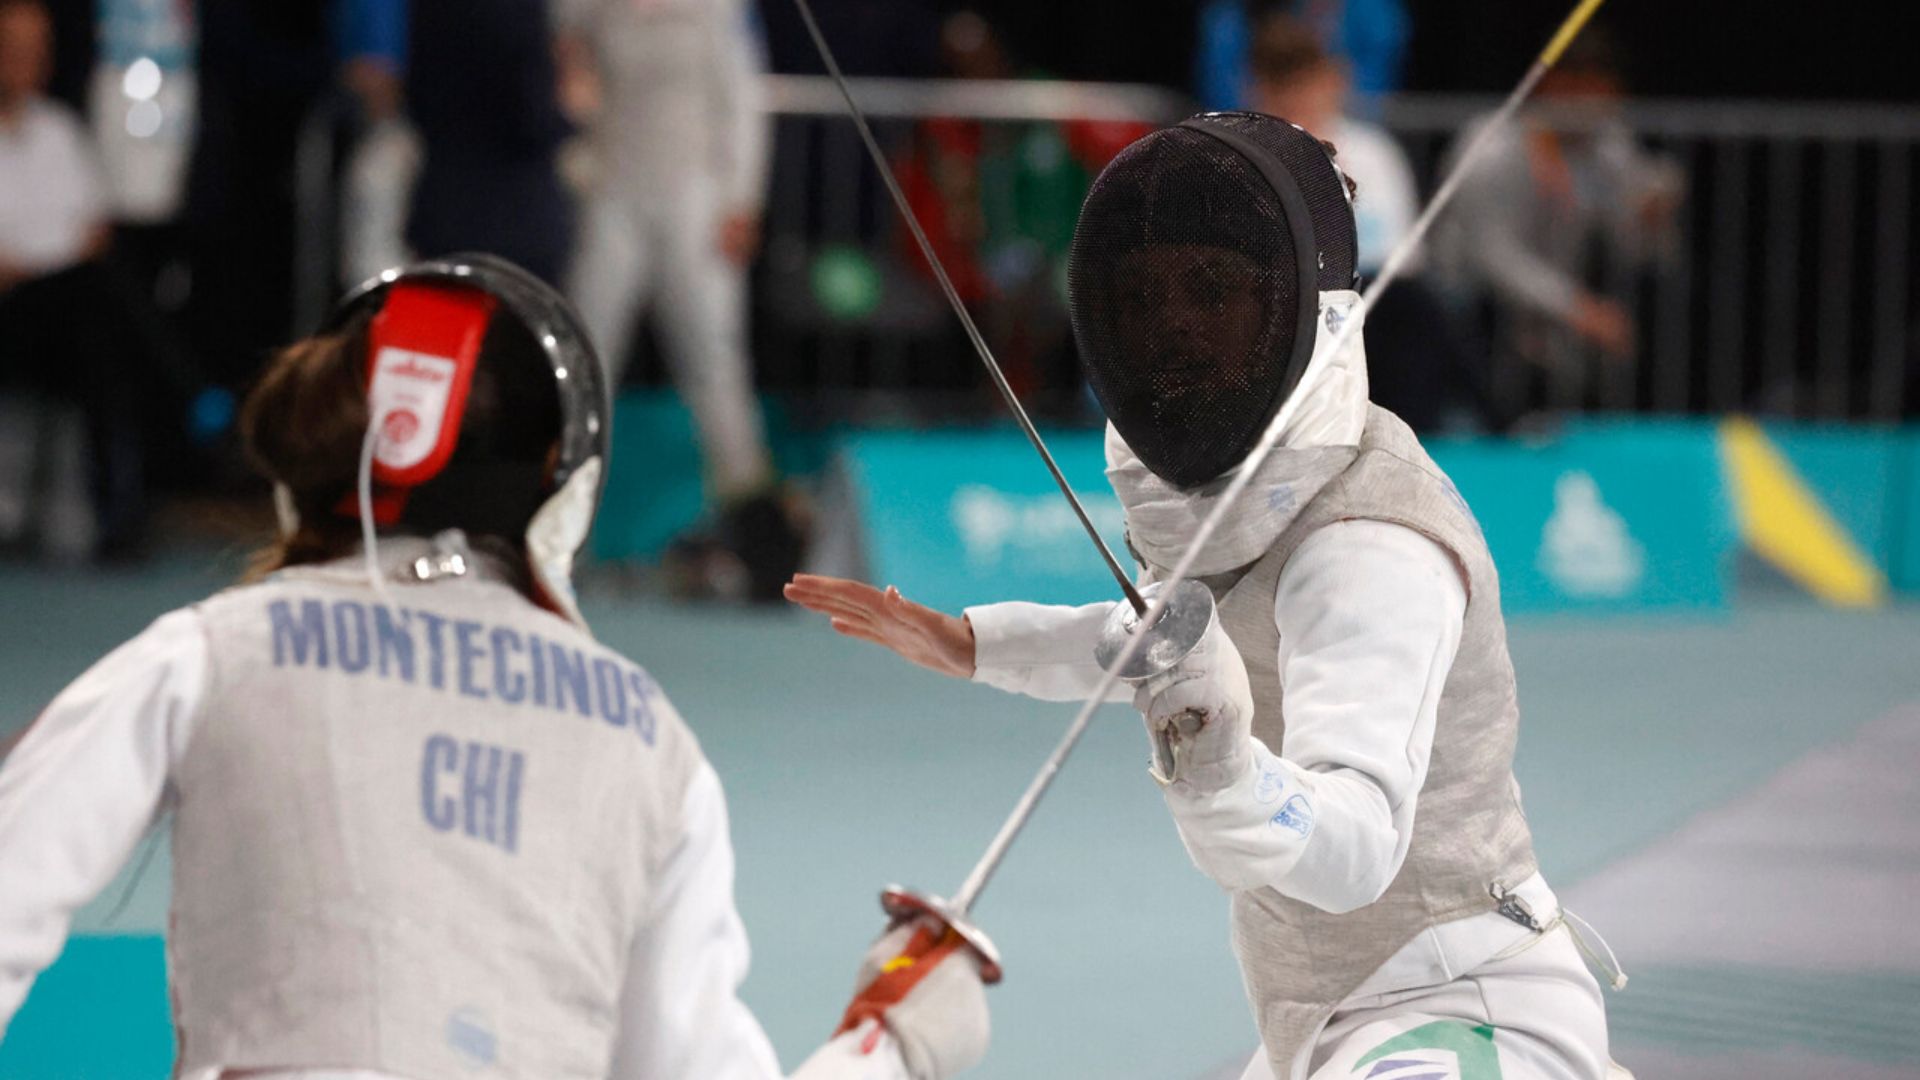 Fencing: Brazil triumphs over Chile in female's foil team event